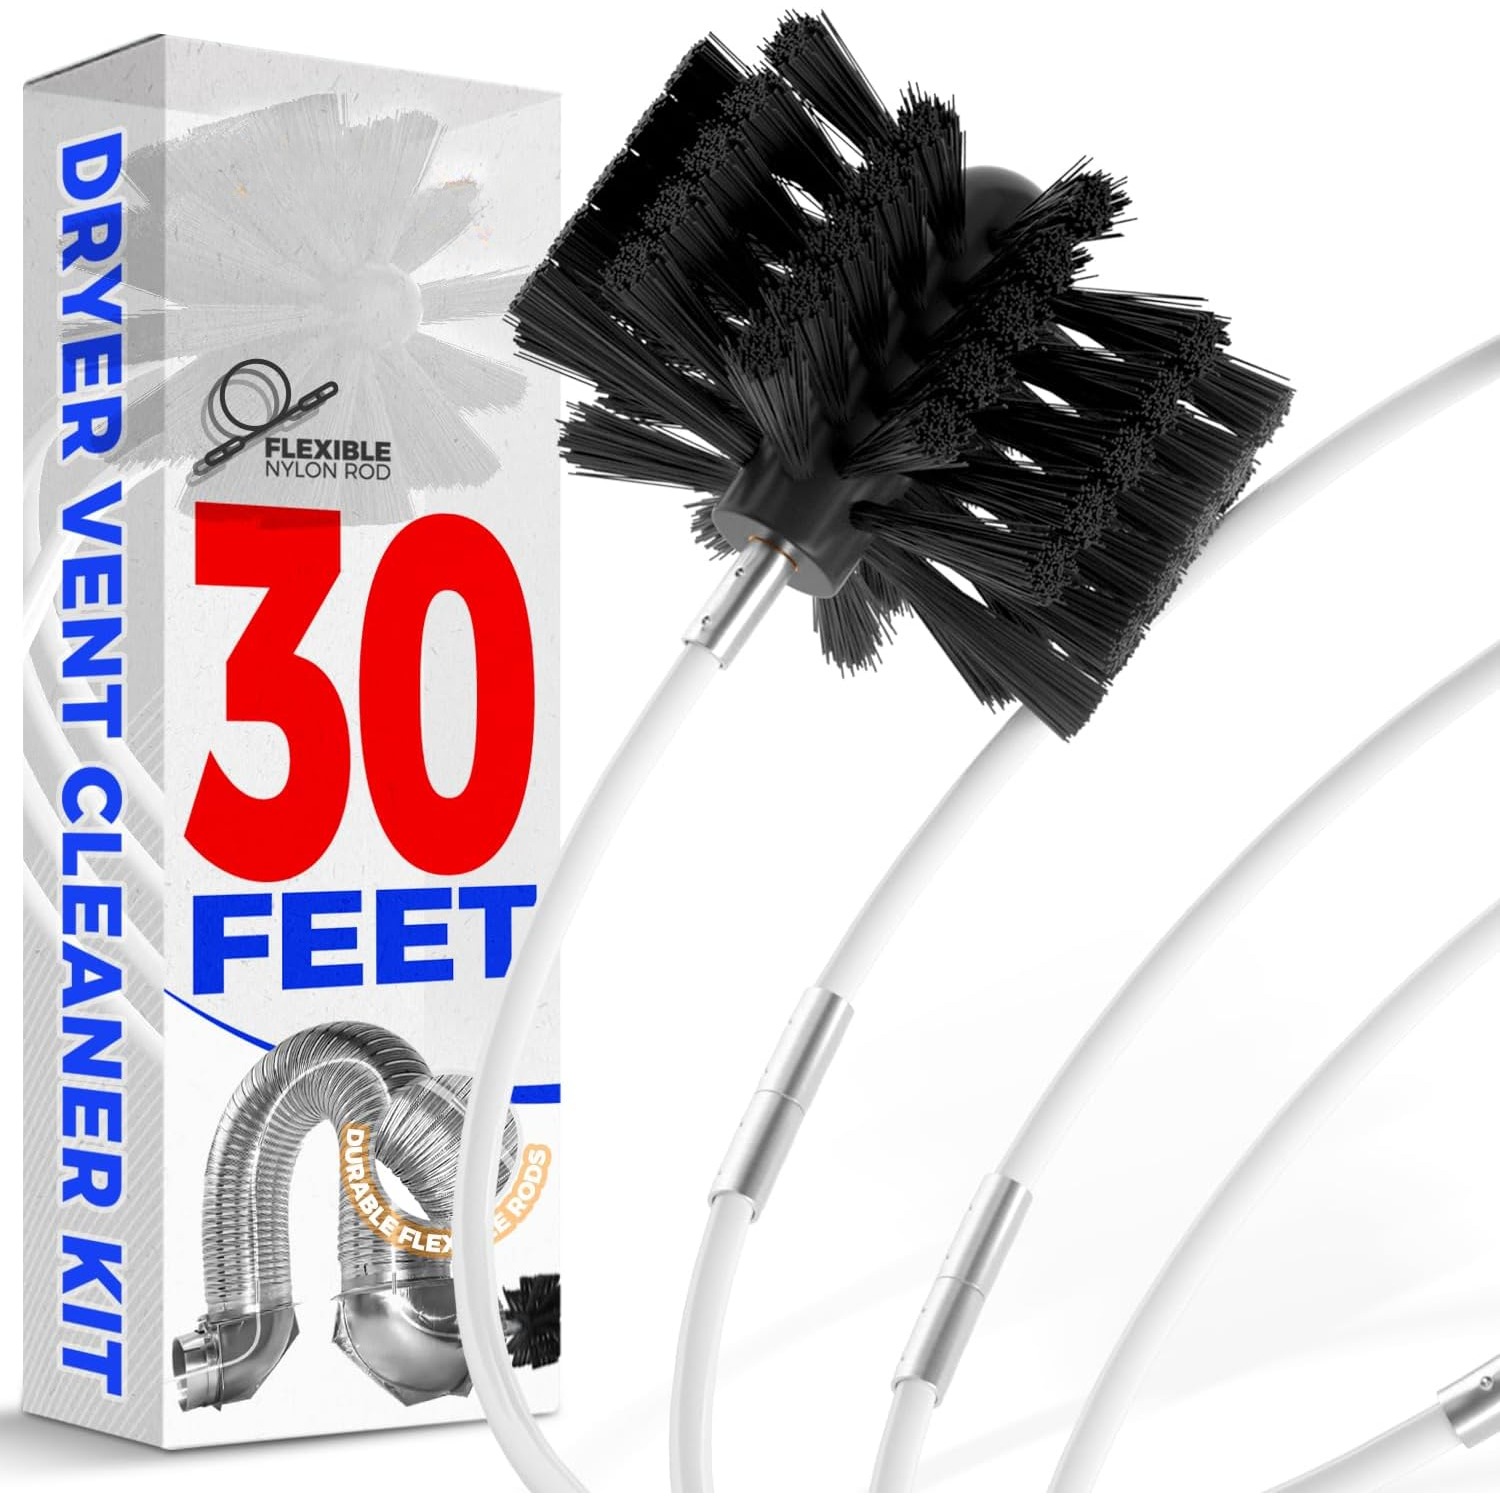  Dryer Vent Cleaner Kit & Refrigerator Condenser Coil Brush-Dryer  Lint Brush Vent Trap Cleaner-Vacuum Attachment for Small Crevice- Crevice  Tool-Dryer Cleaner Brush (Cleaner Dryer)